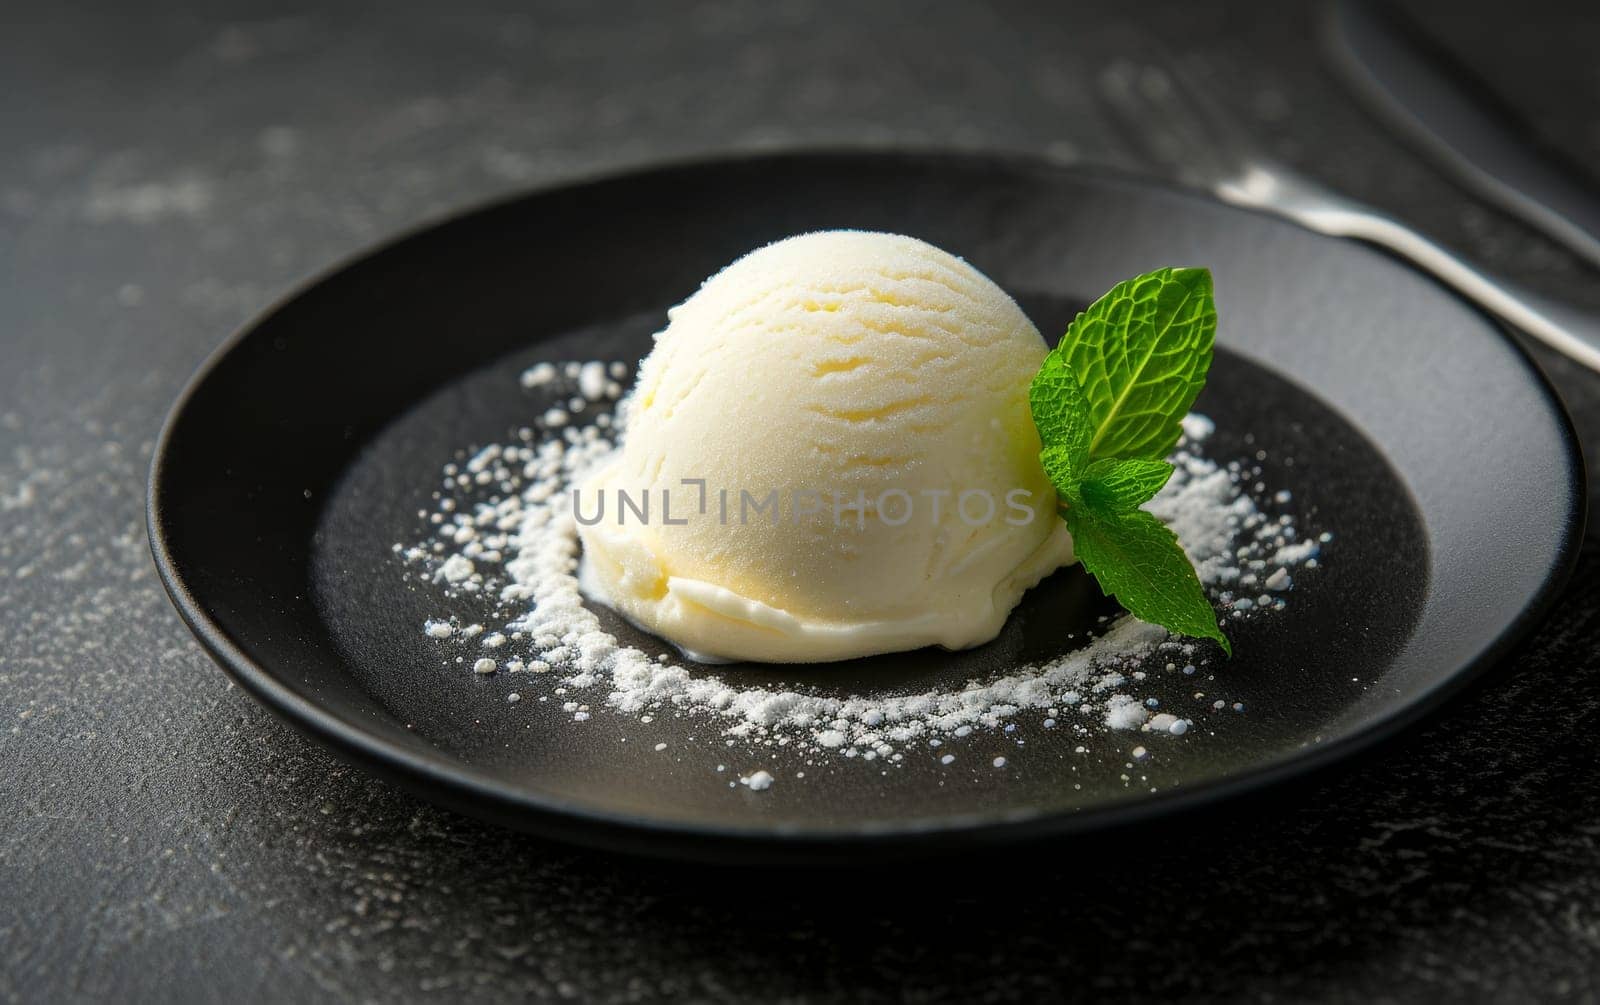 Perfect scoop of vanilla ice cream with a mint leaf on a dark plate